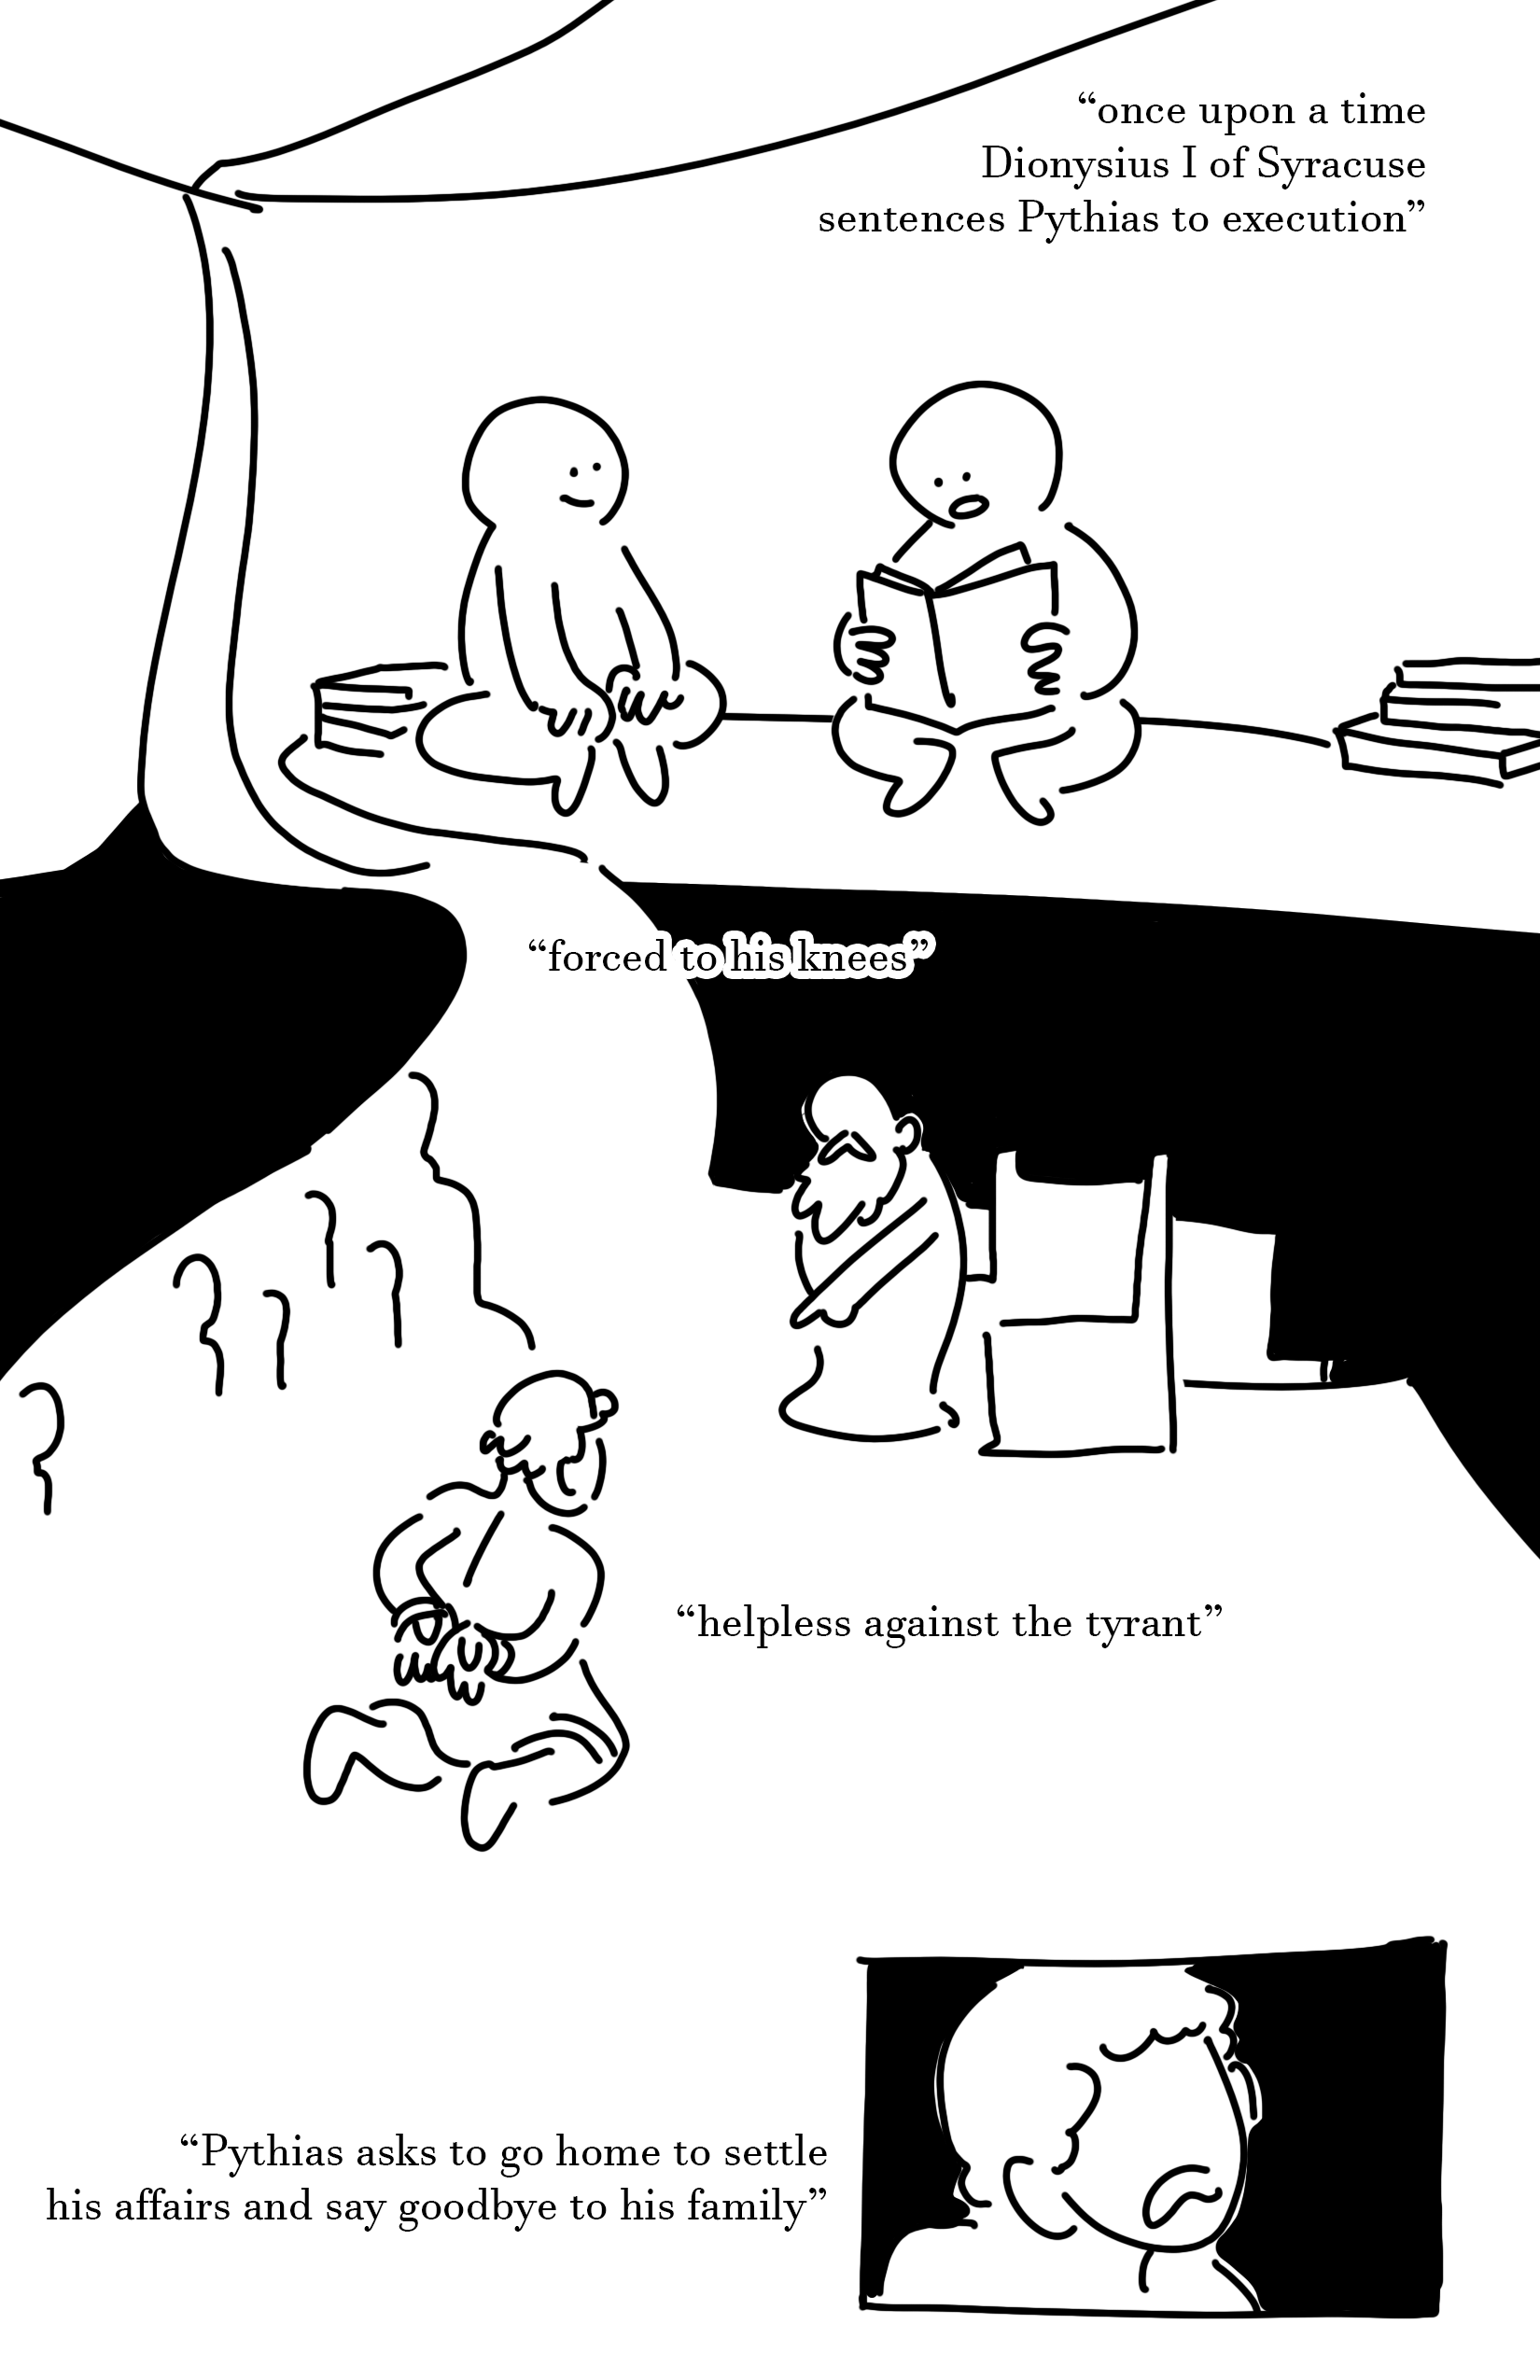 Black and white comic with simple digital drawings Panel 1: Two kids sitting under a tarp held up by a string and hed down by 2 small stacks of books. The kid on the left smiles and has their hands on their feet with their legs folded. They are looking at the kid on the right who holds a book in their lap and is reading. Text: once upon a time Dionysius I of Syracuse sentences Pythias to execution Panel 2: In front of a crowd of people, a bearded robed man stands in front of a throne pointing down at a man on his knees. The man's hands are tied behind his back and he has no shirt on. Text: forced to his knees, helpless against the tyrant, Pythias asks to go home to settle his affairs and say goodbye to his family Panel 3: Close up of the face of the man who is knelt on the ground. He has a downturned mouth as he speaks but his eyes aren't pictured.